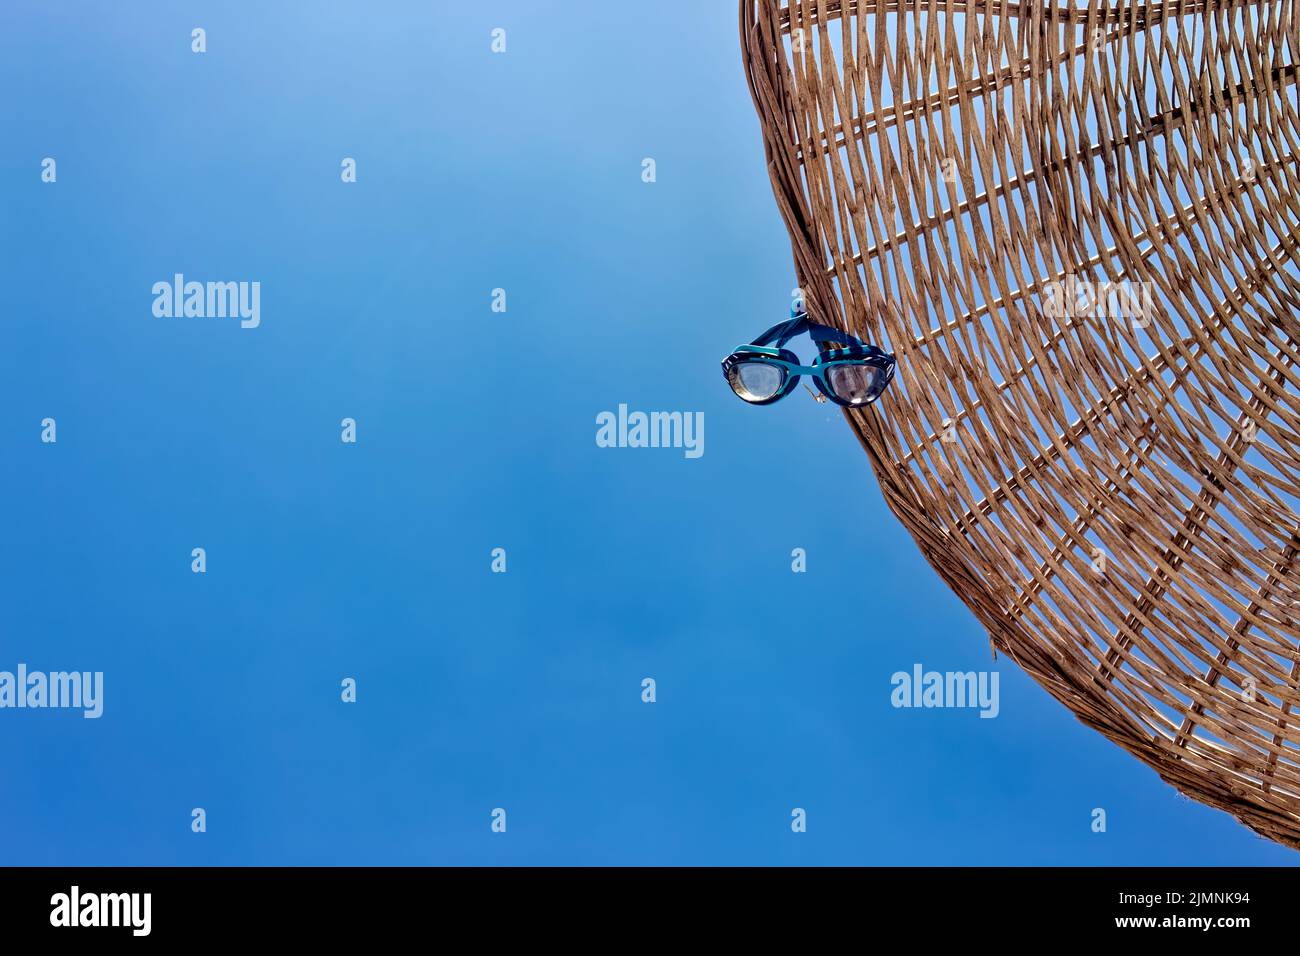 Swim goggles hanging on a parasol umbrella. View from directly below with copy space. Clear, sunny, open sky. Stock Photo